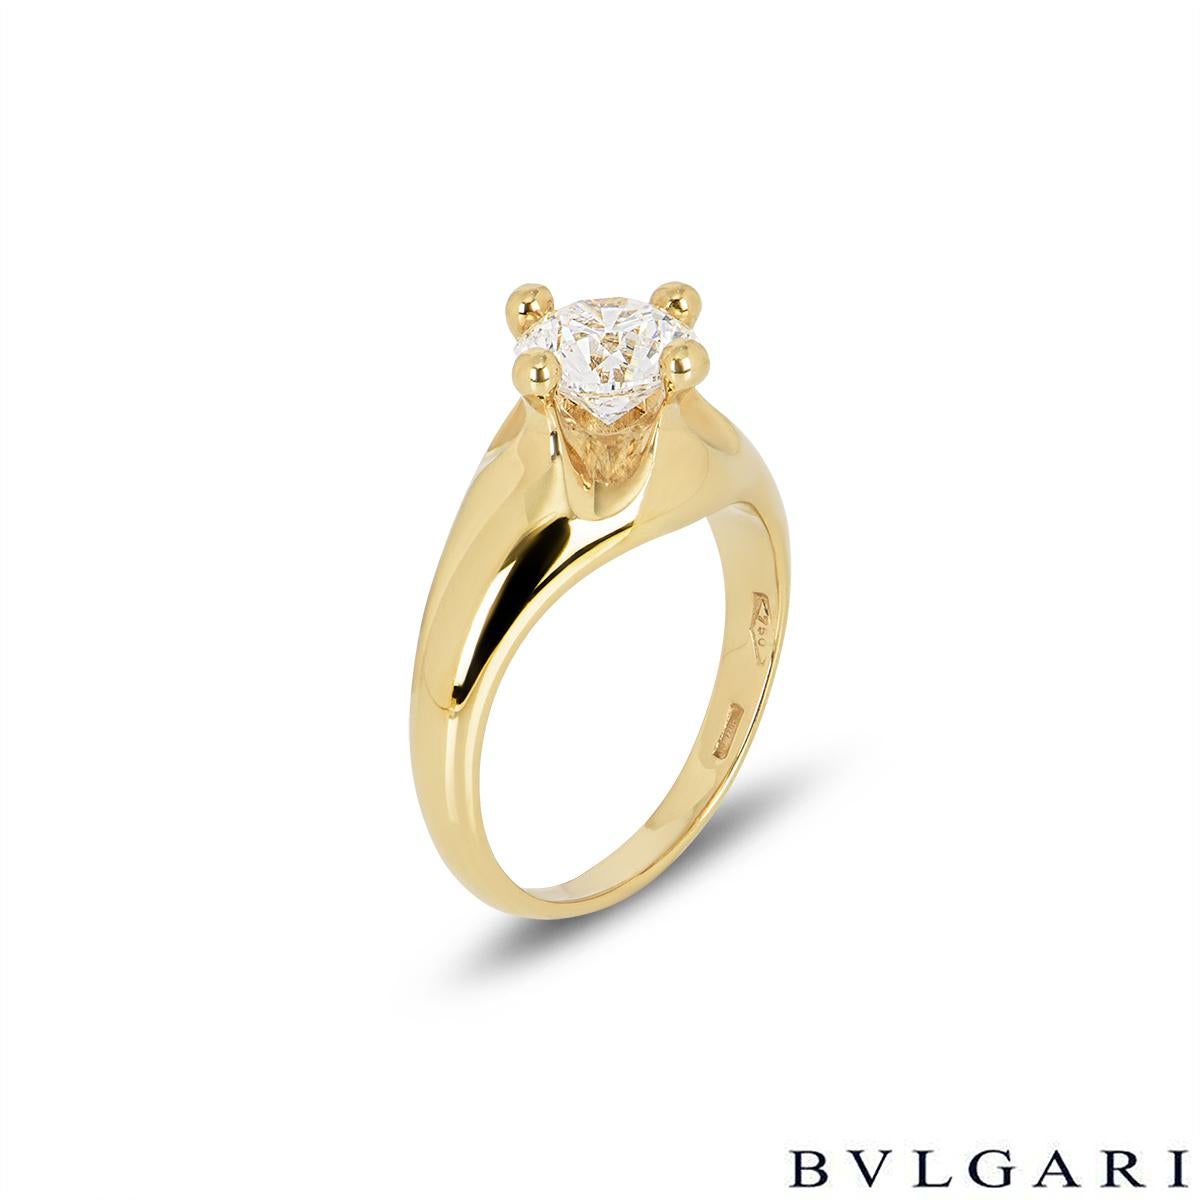 A stunning 18k yellow gold Bvlgari diamond engagement ring. The ring is set to the centre with a 1.00ct round brilliant cut diamond in a raised four claw compass setting, F in colour and VS1 in clarity. The tapered 8mm ring is currently a size UK H½